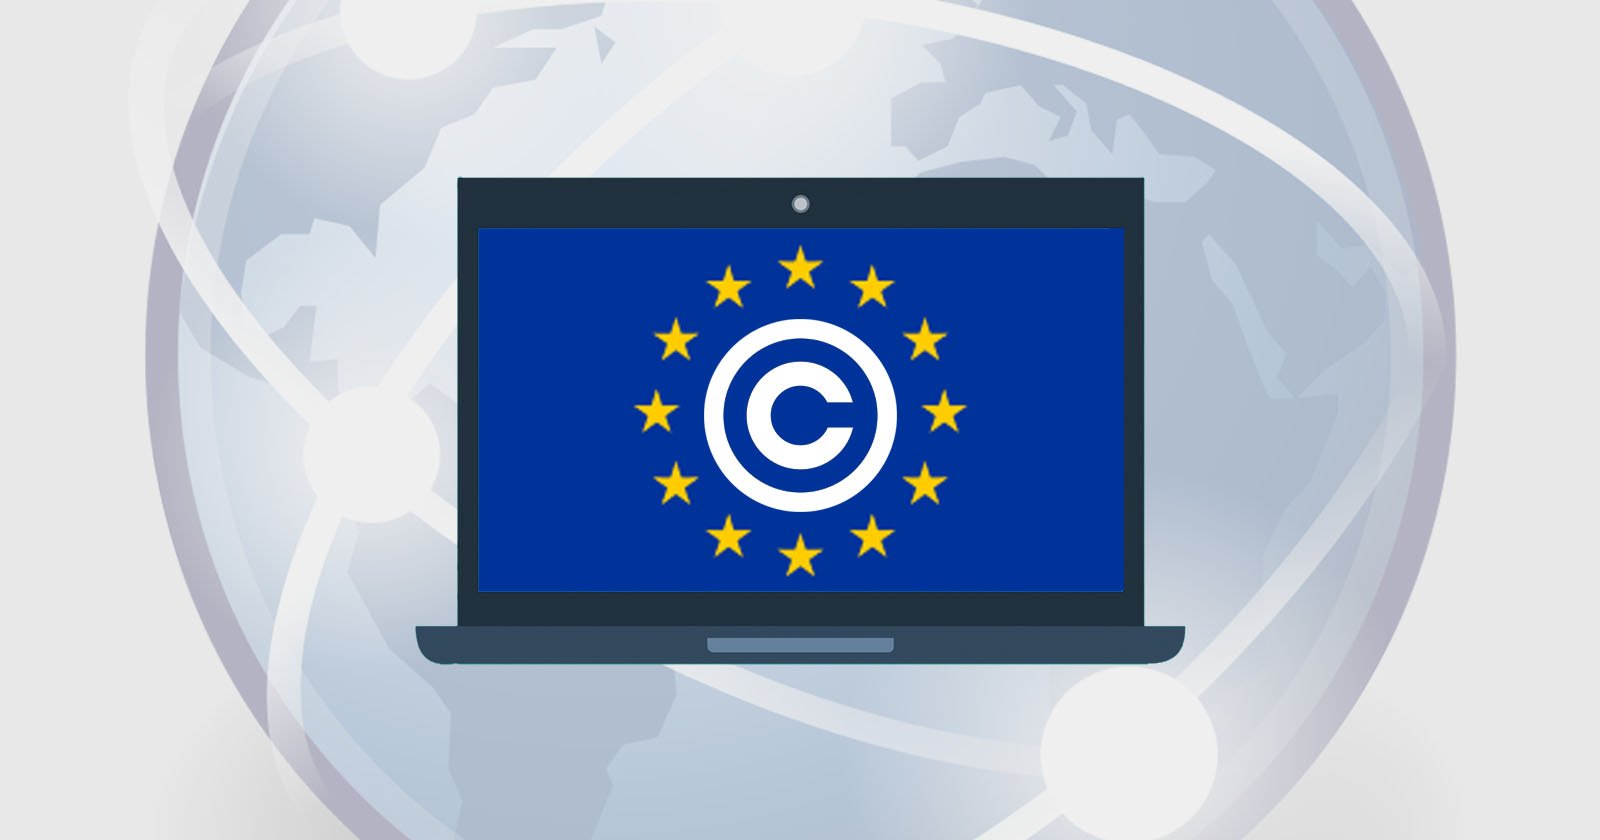 Online Photos Can’t Be Used Without Permission, EU Court Rules